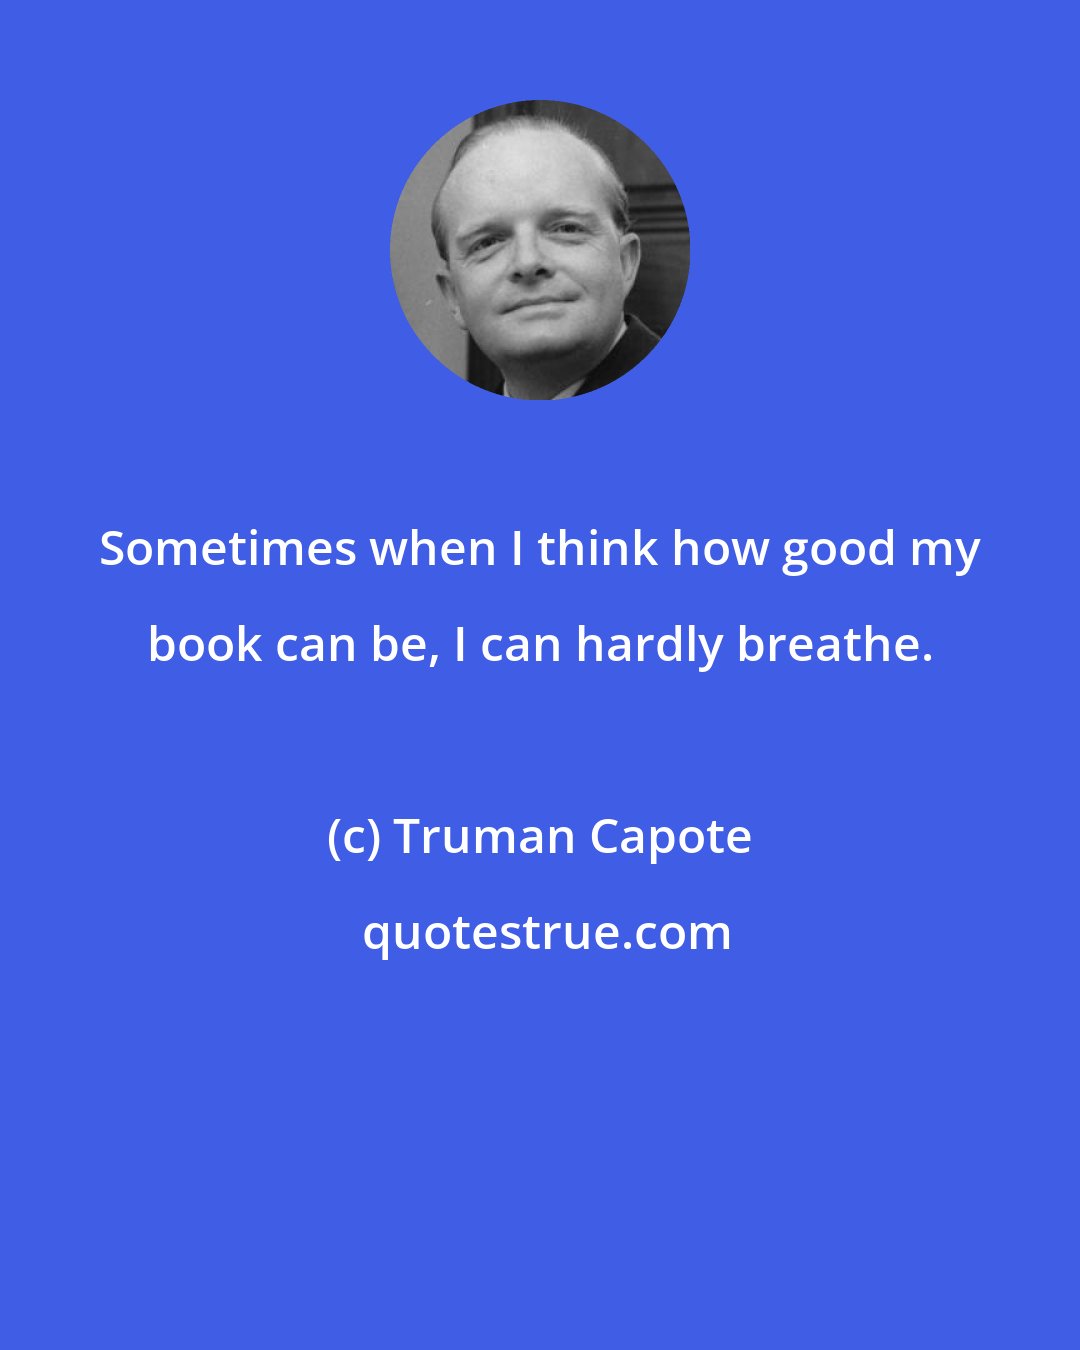 Truman Capote: Sometimes when I think how good my book can be, I can hardly breathe.